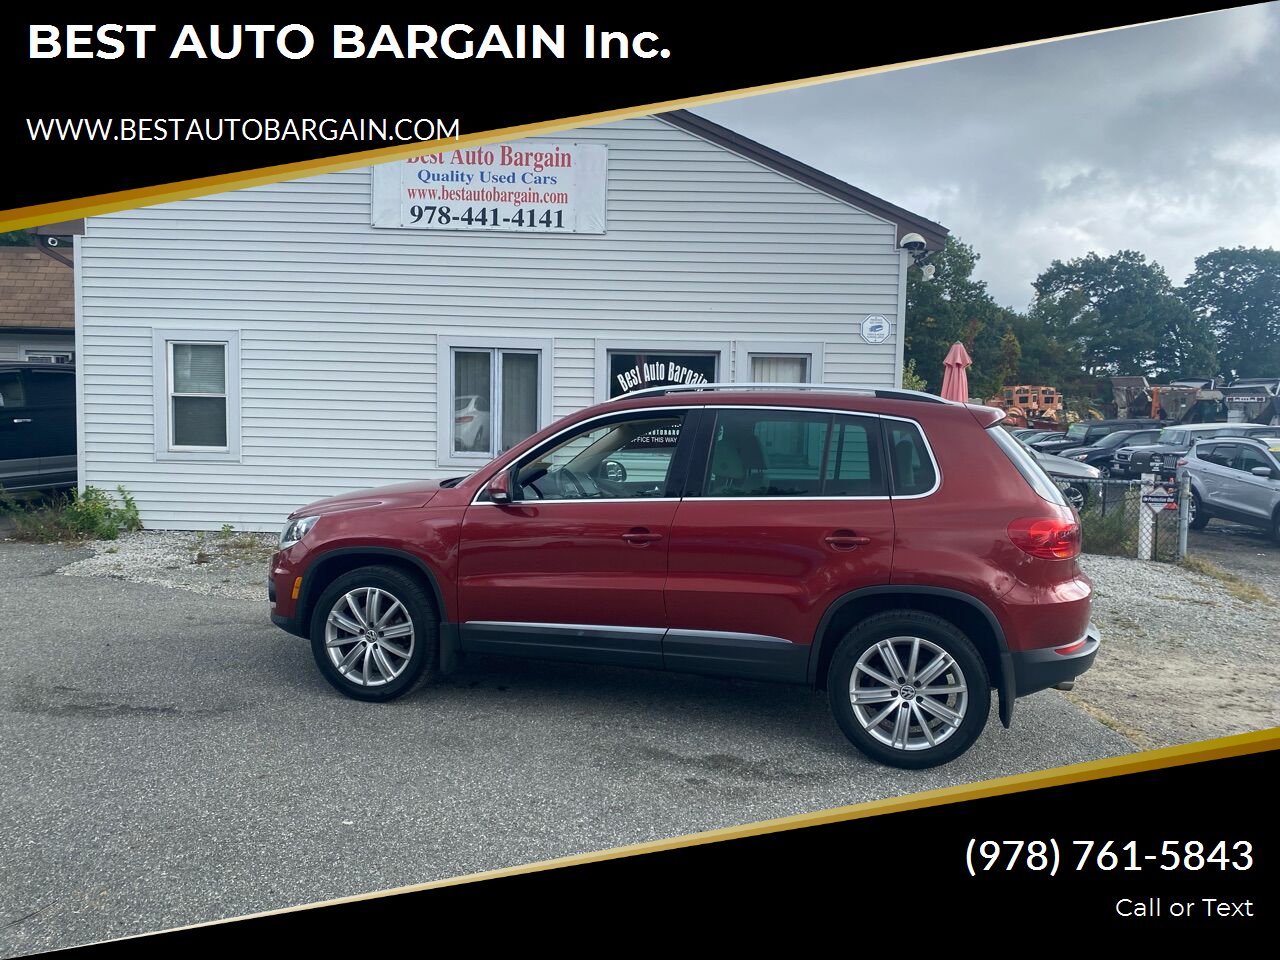 2013 Volkswagen Tiguan SE 4MOTION AWD 4DR SUV W/SUNROOF AND NAVIGATION AWD